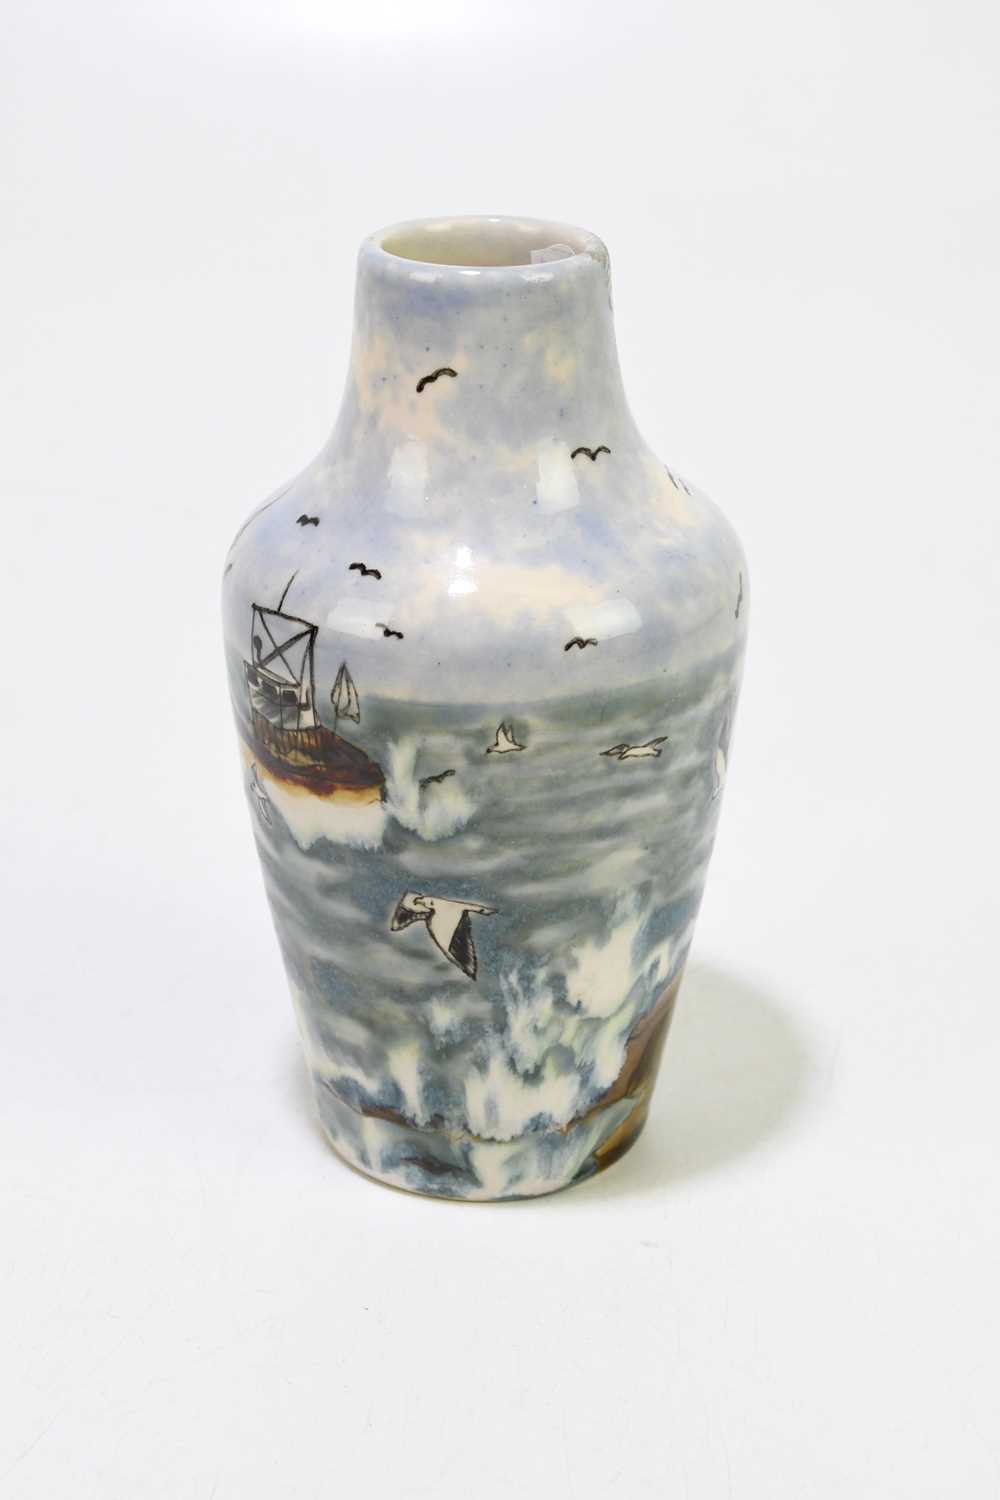 COBRIDGE STONEWARE; a vase with inverted neck decorated with trawlers and seagulls, height 17cm. - Image 4 of 6